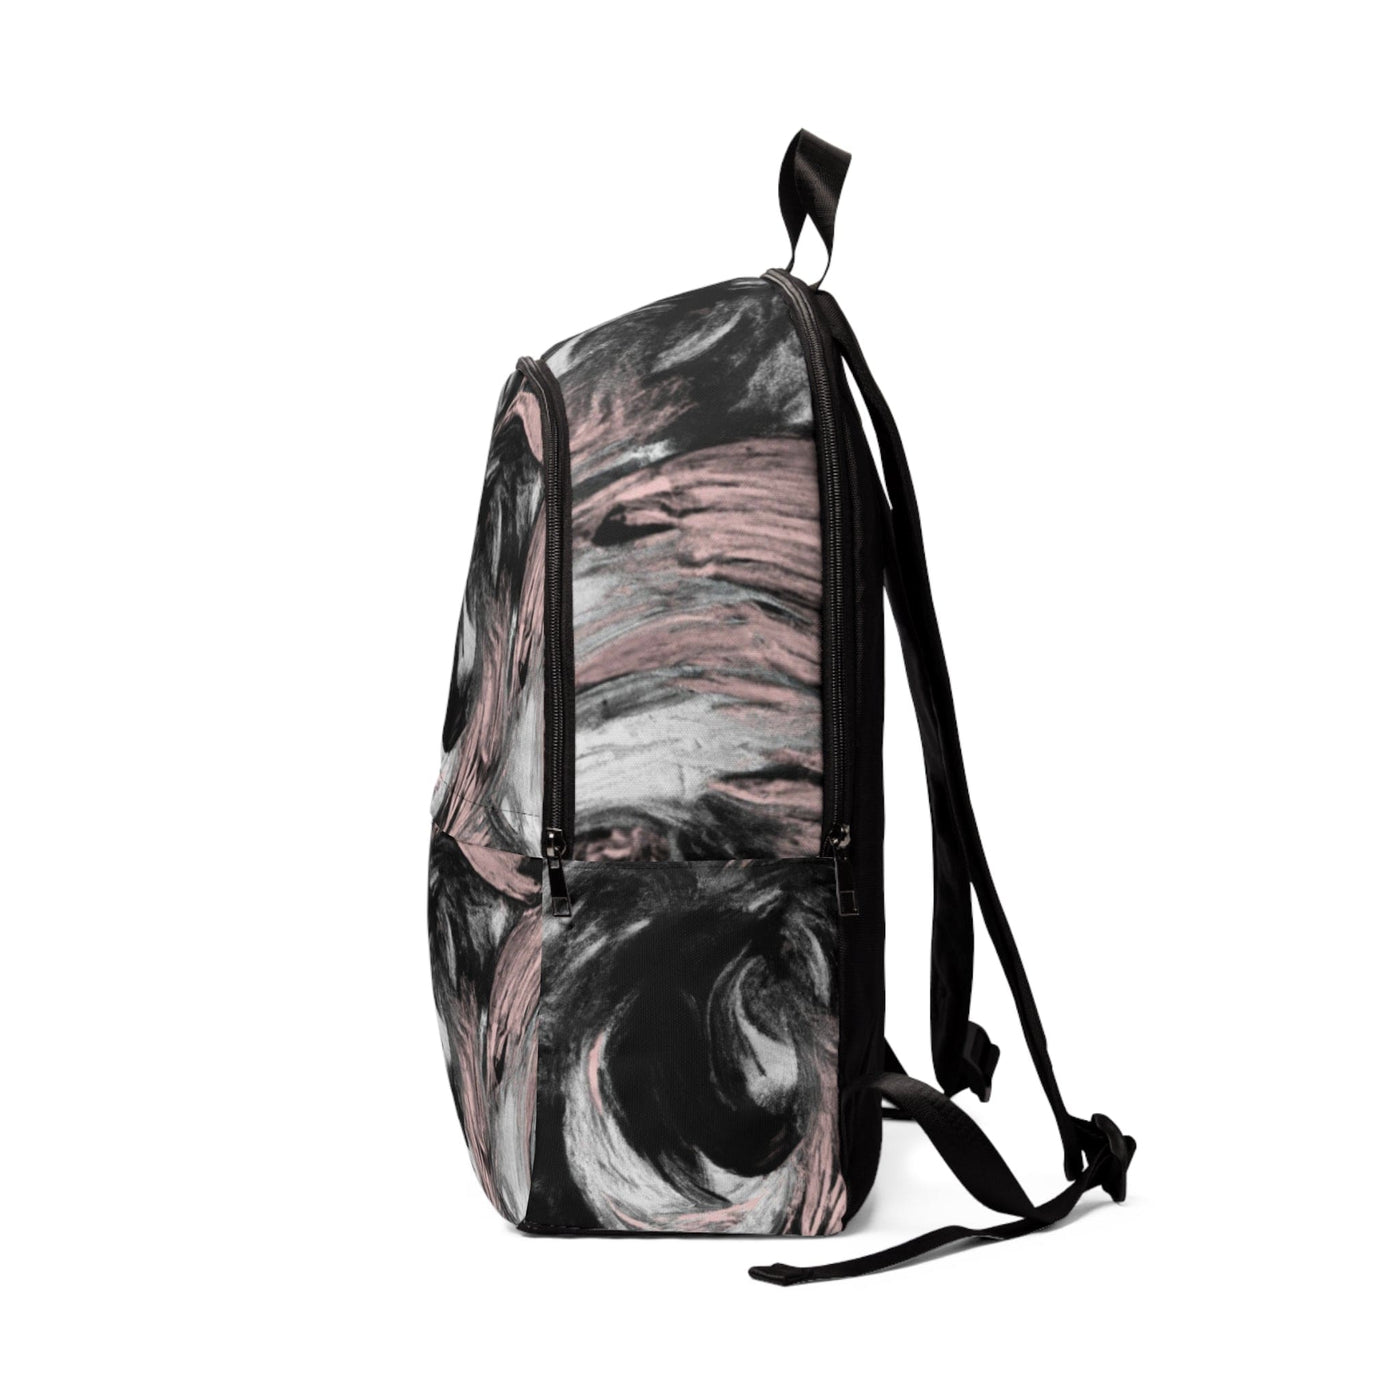 Fashion Backpack Waterproof Black Pink White Abstract Pattern - Bags